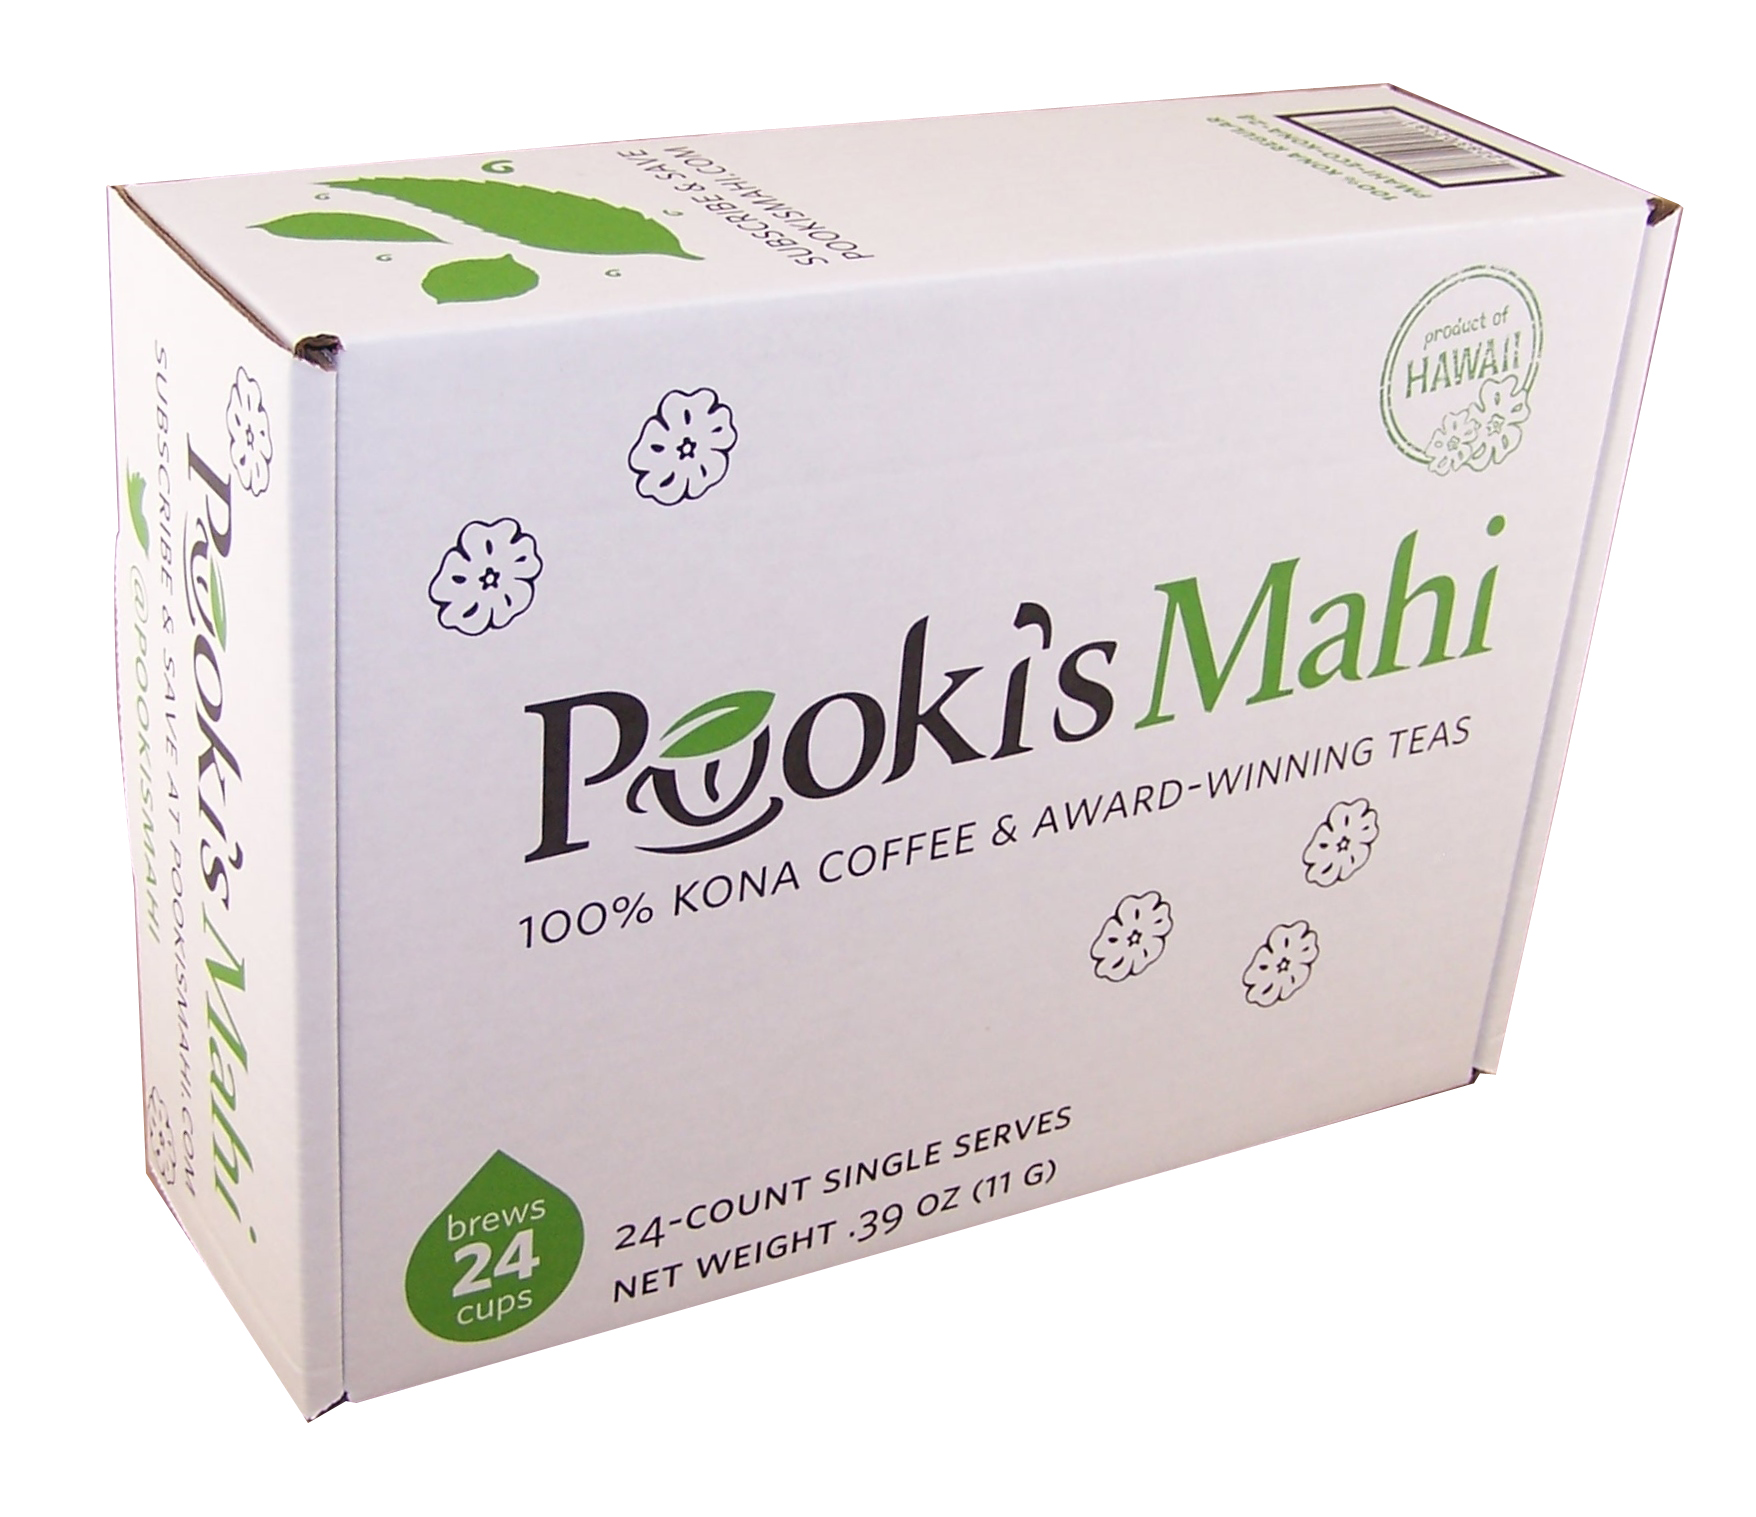 Pooki's Mahi's new environmentally packaging for 100% Kona coffee pods product line.